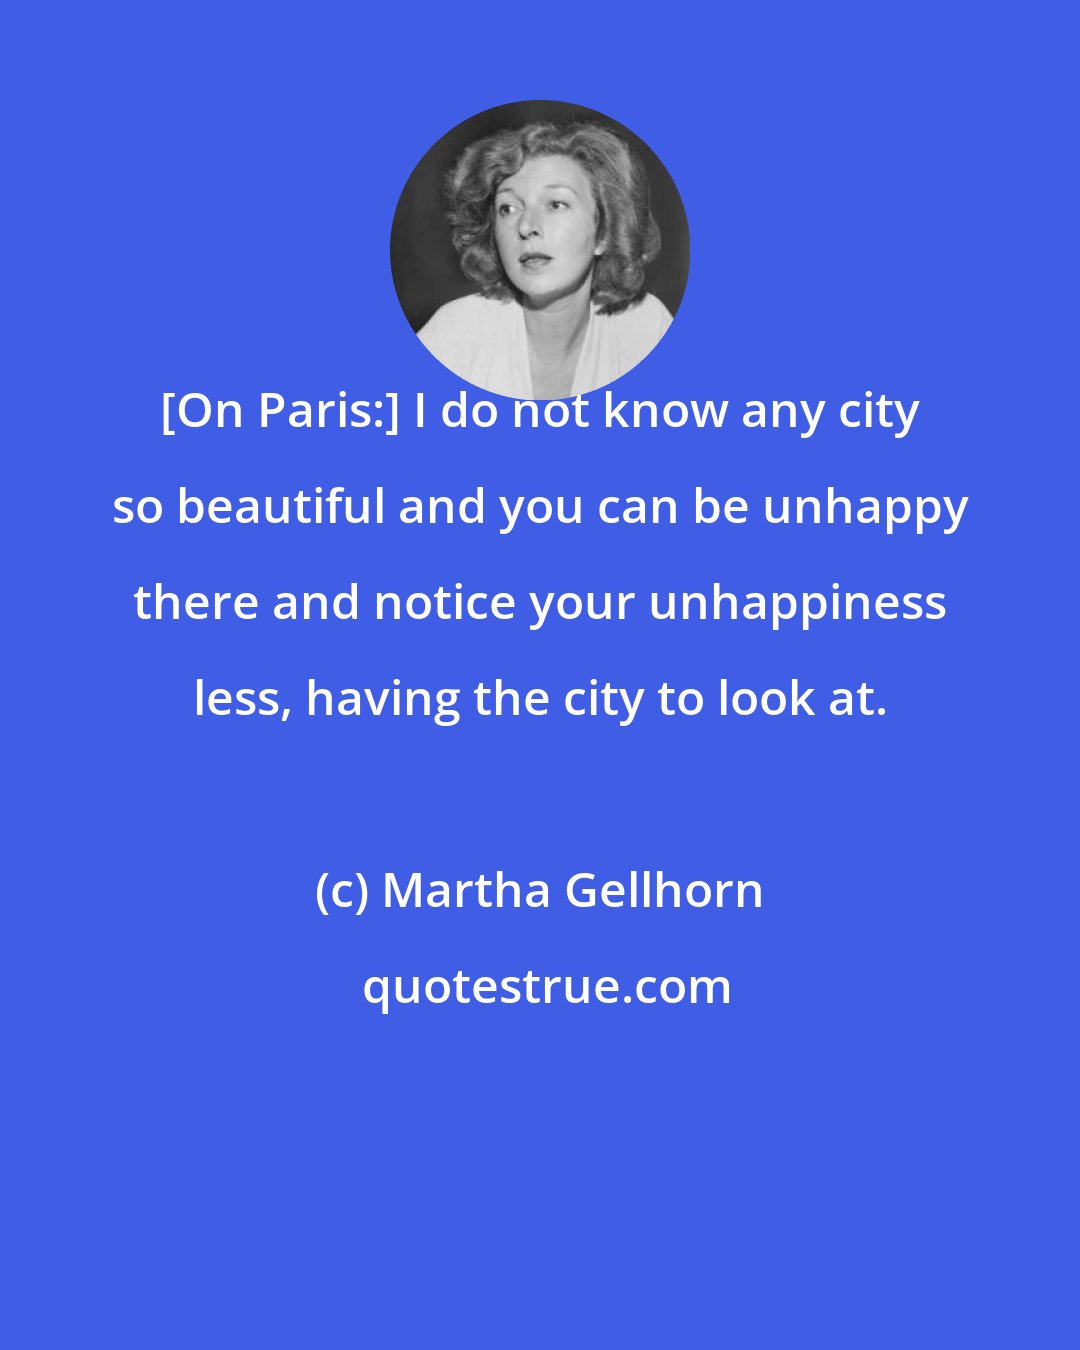 Martha Gellhorn: [On Paris:] I do not know any city so beautiful and you can be unhappy there and notice your unhappiness less, having the city to look at.